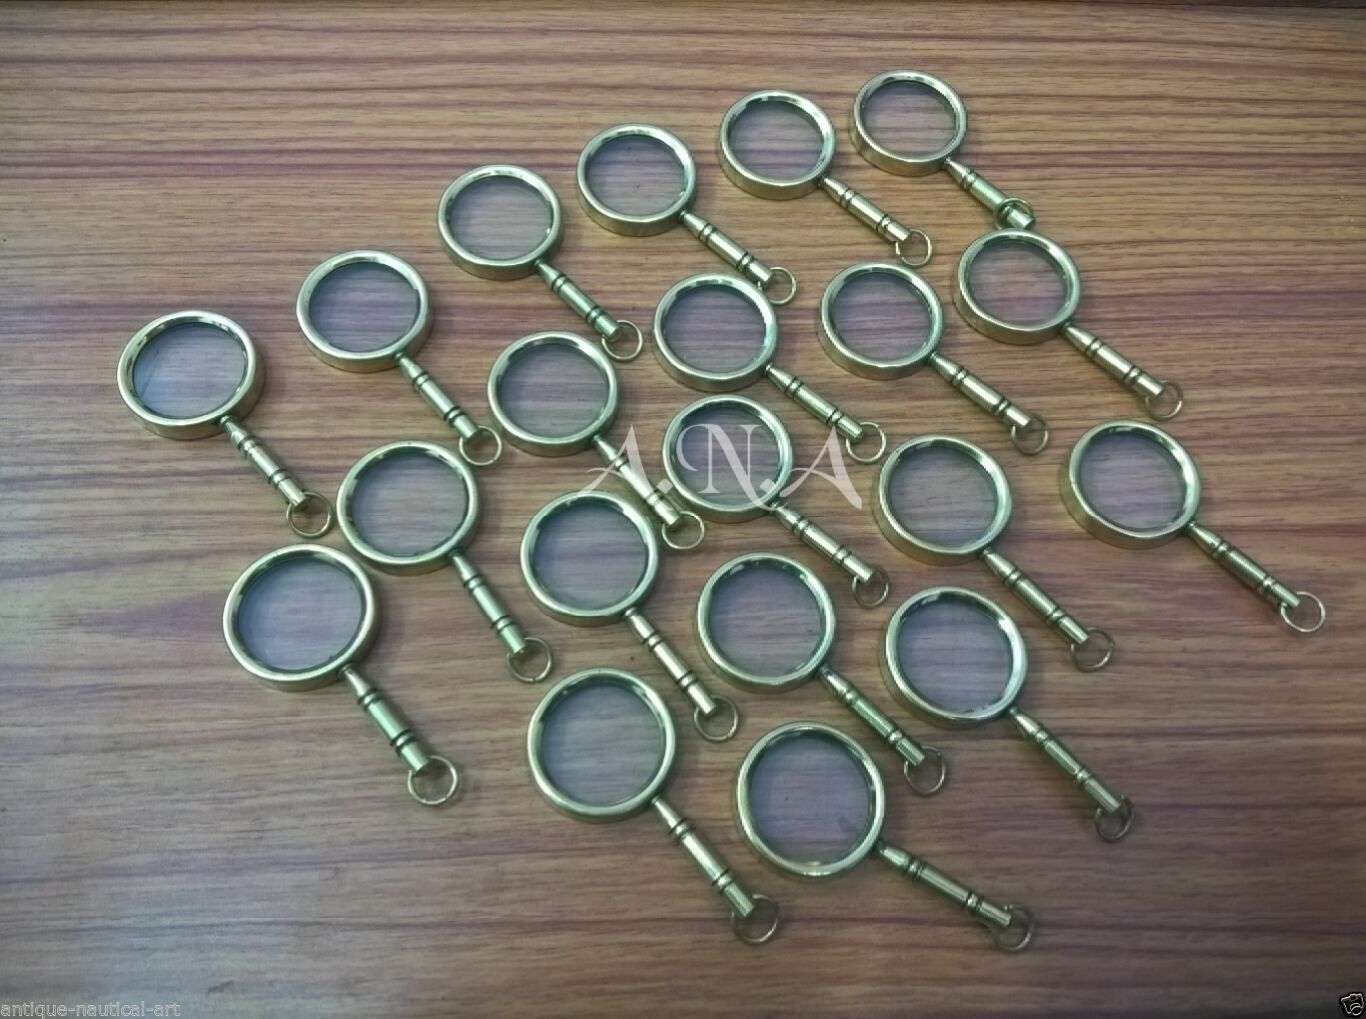 Lot Of 20 Pcs Brass Vintage Magnifier Key chain Collectible Magnifying Key Ring  Без бренда - фотография #6